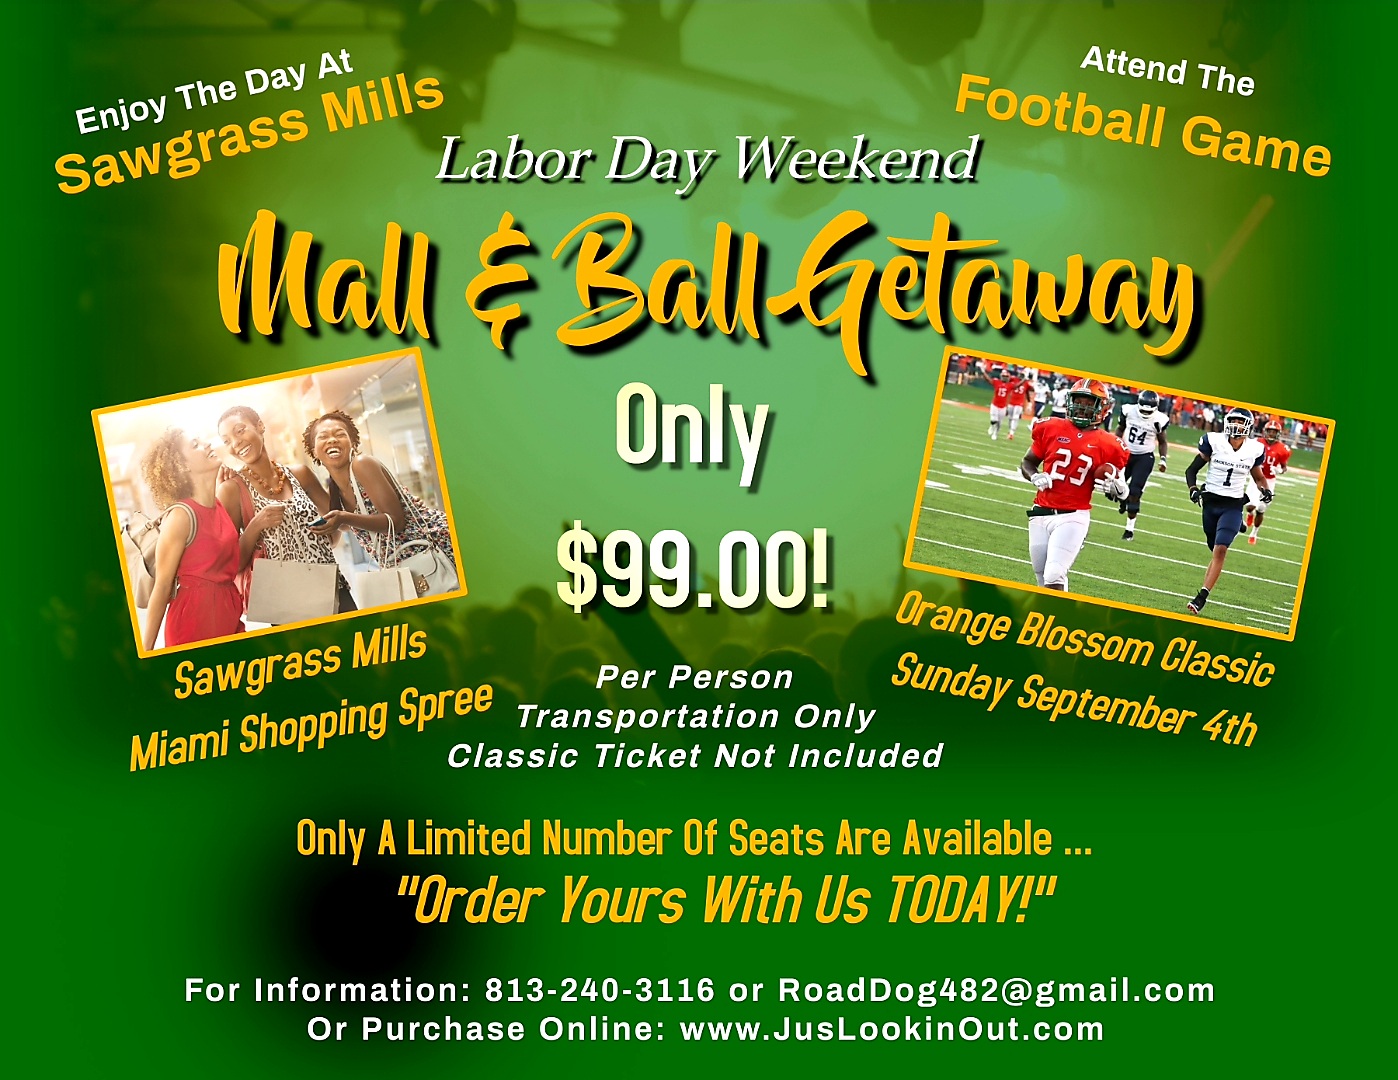 2022 Labor Day Weekend Mall and Ball Getaway Road Ready Tours